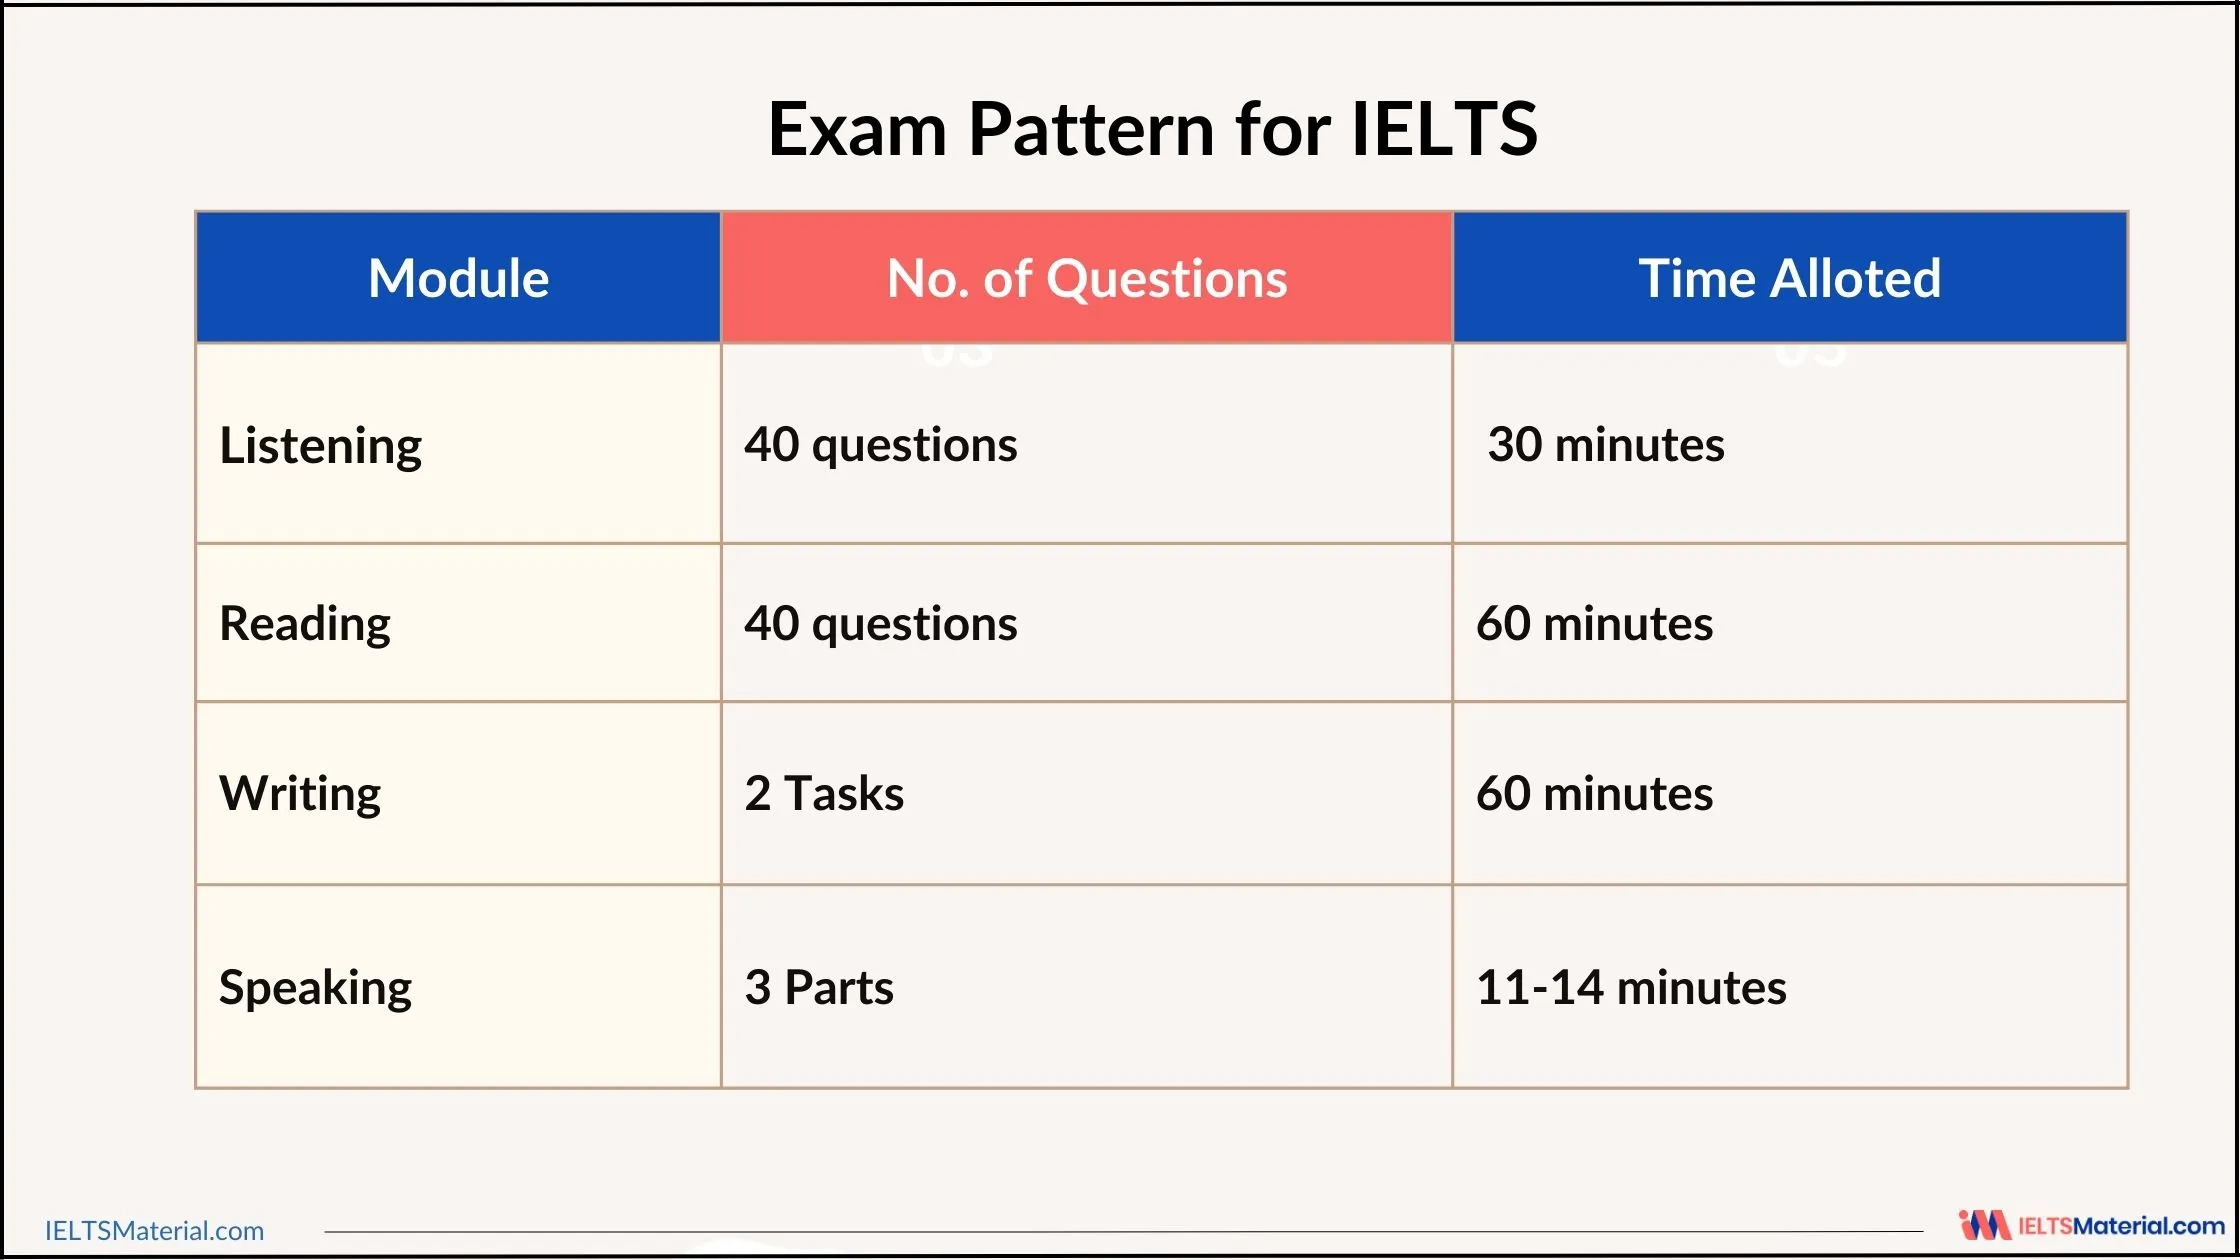 Exam Pattern for IELTS